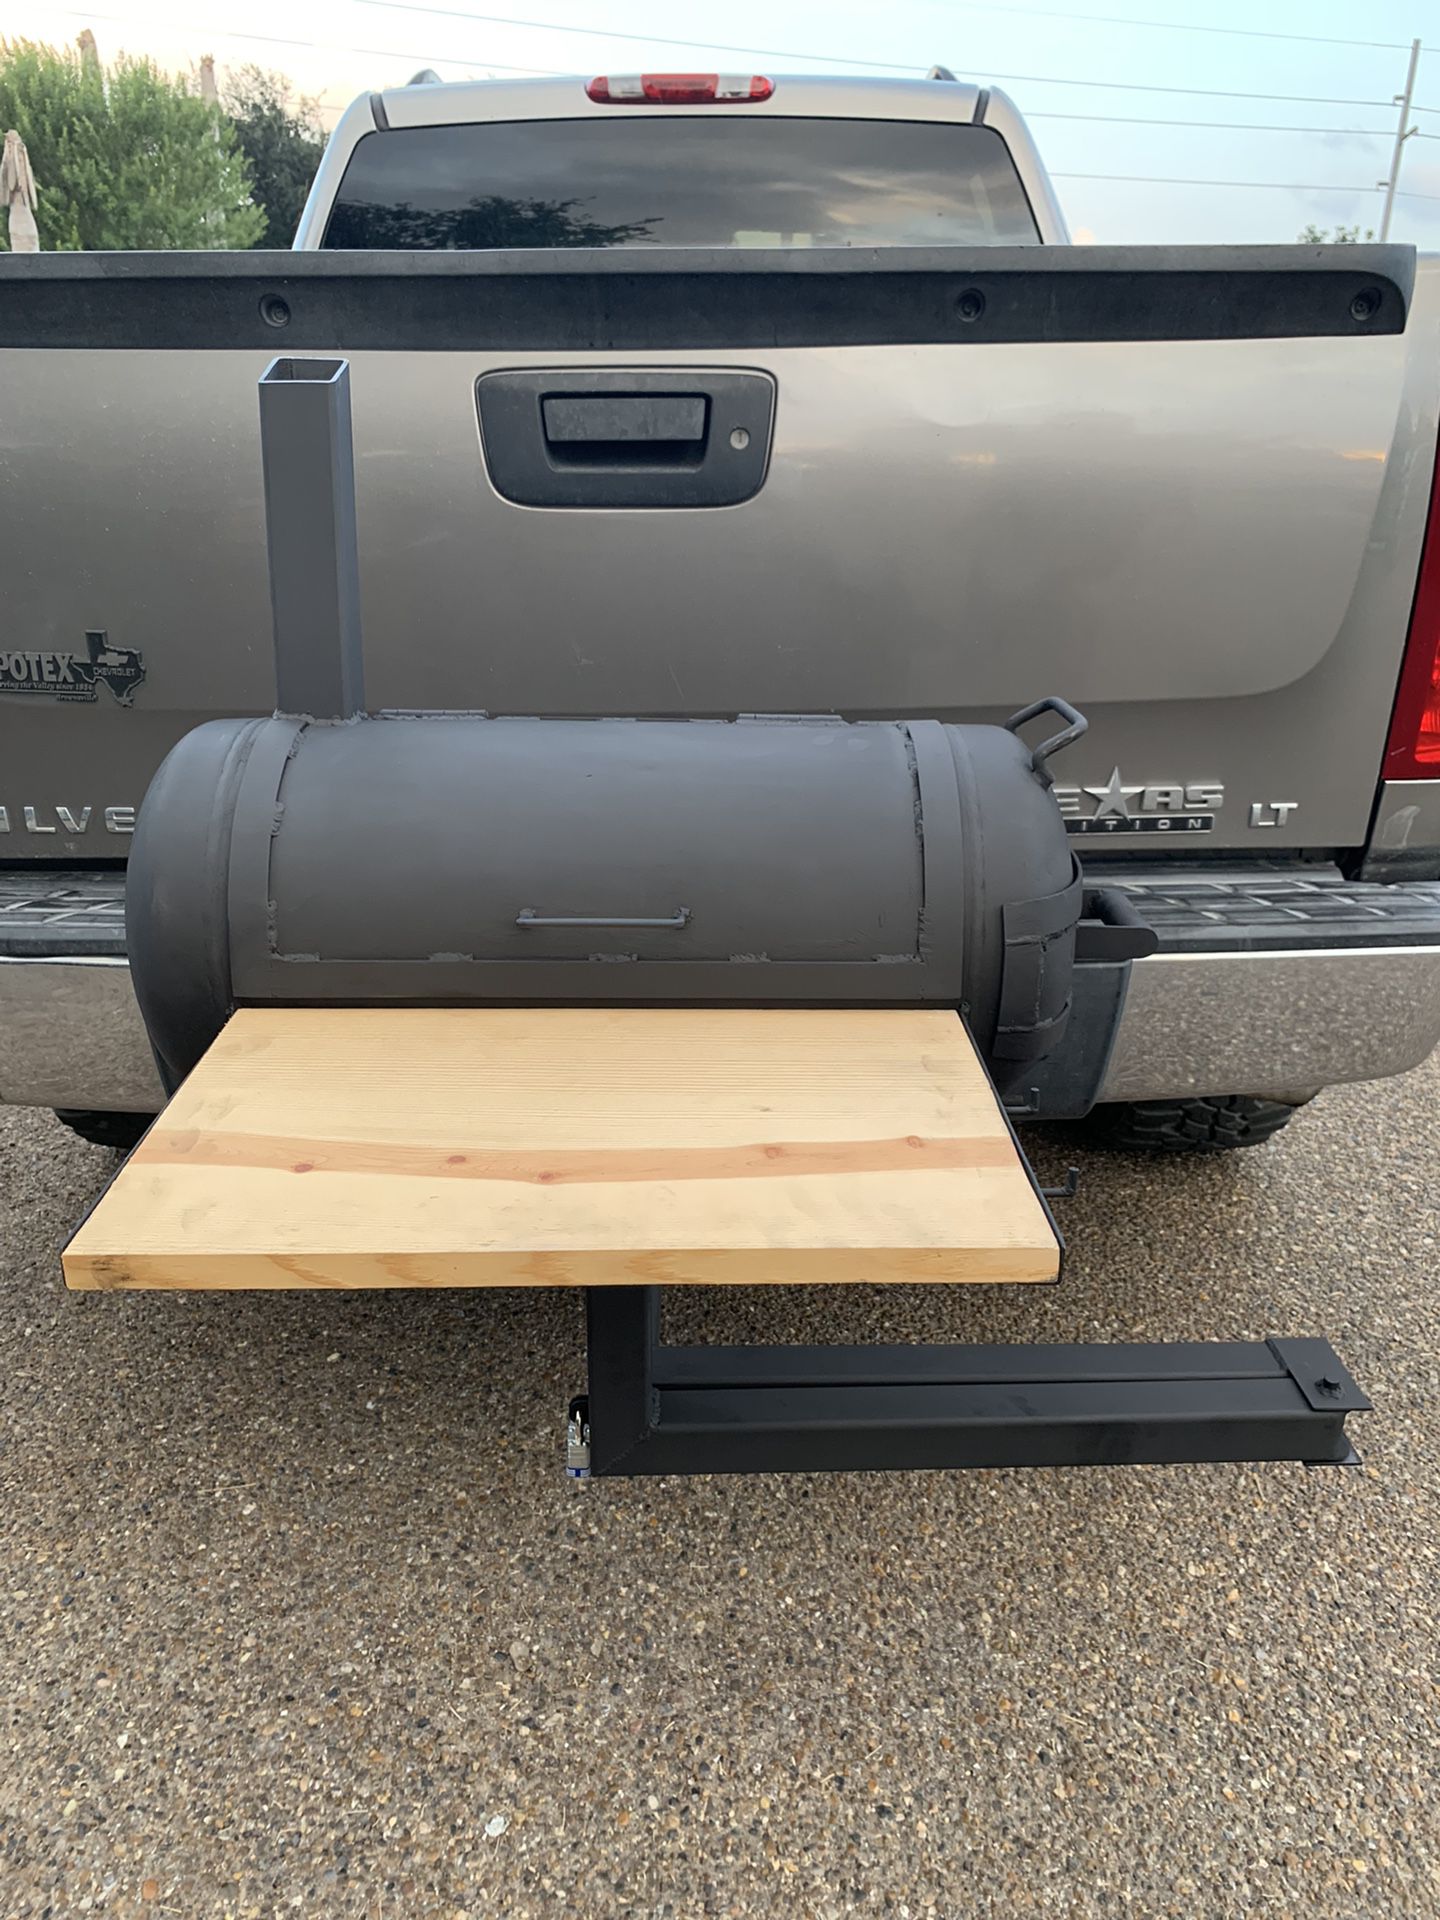 Sell Or TRADE Portable BBQ Pit Hitch Grill 